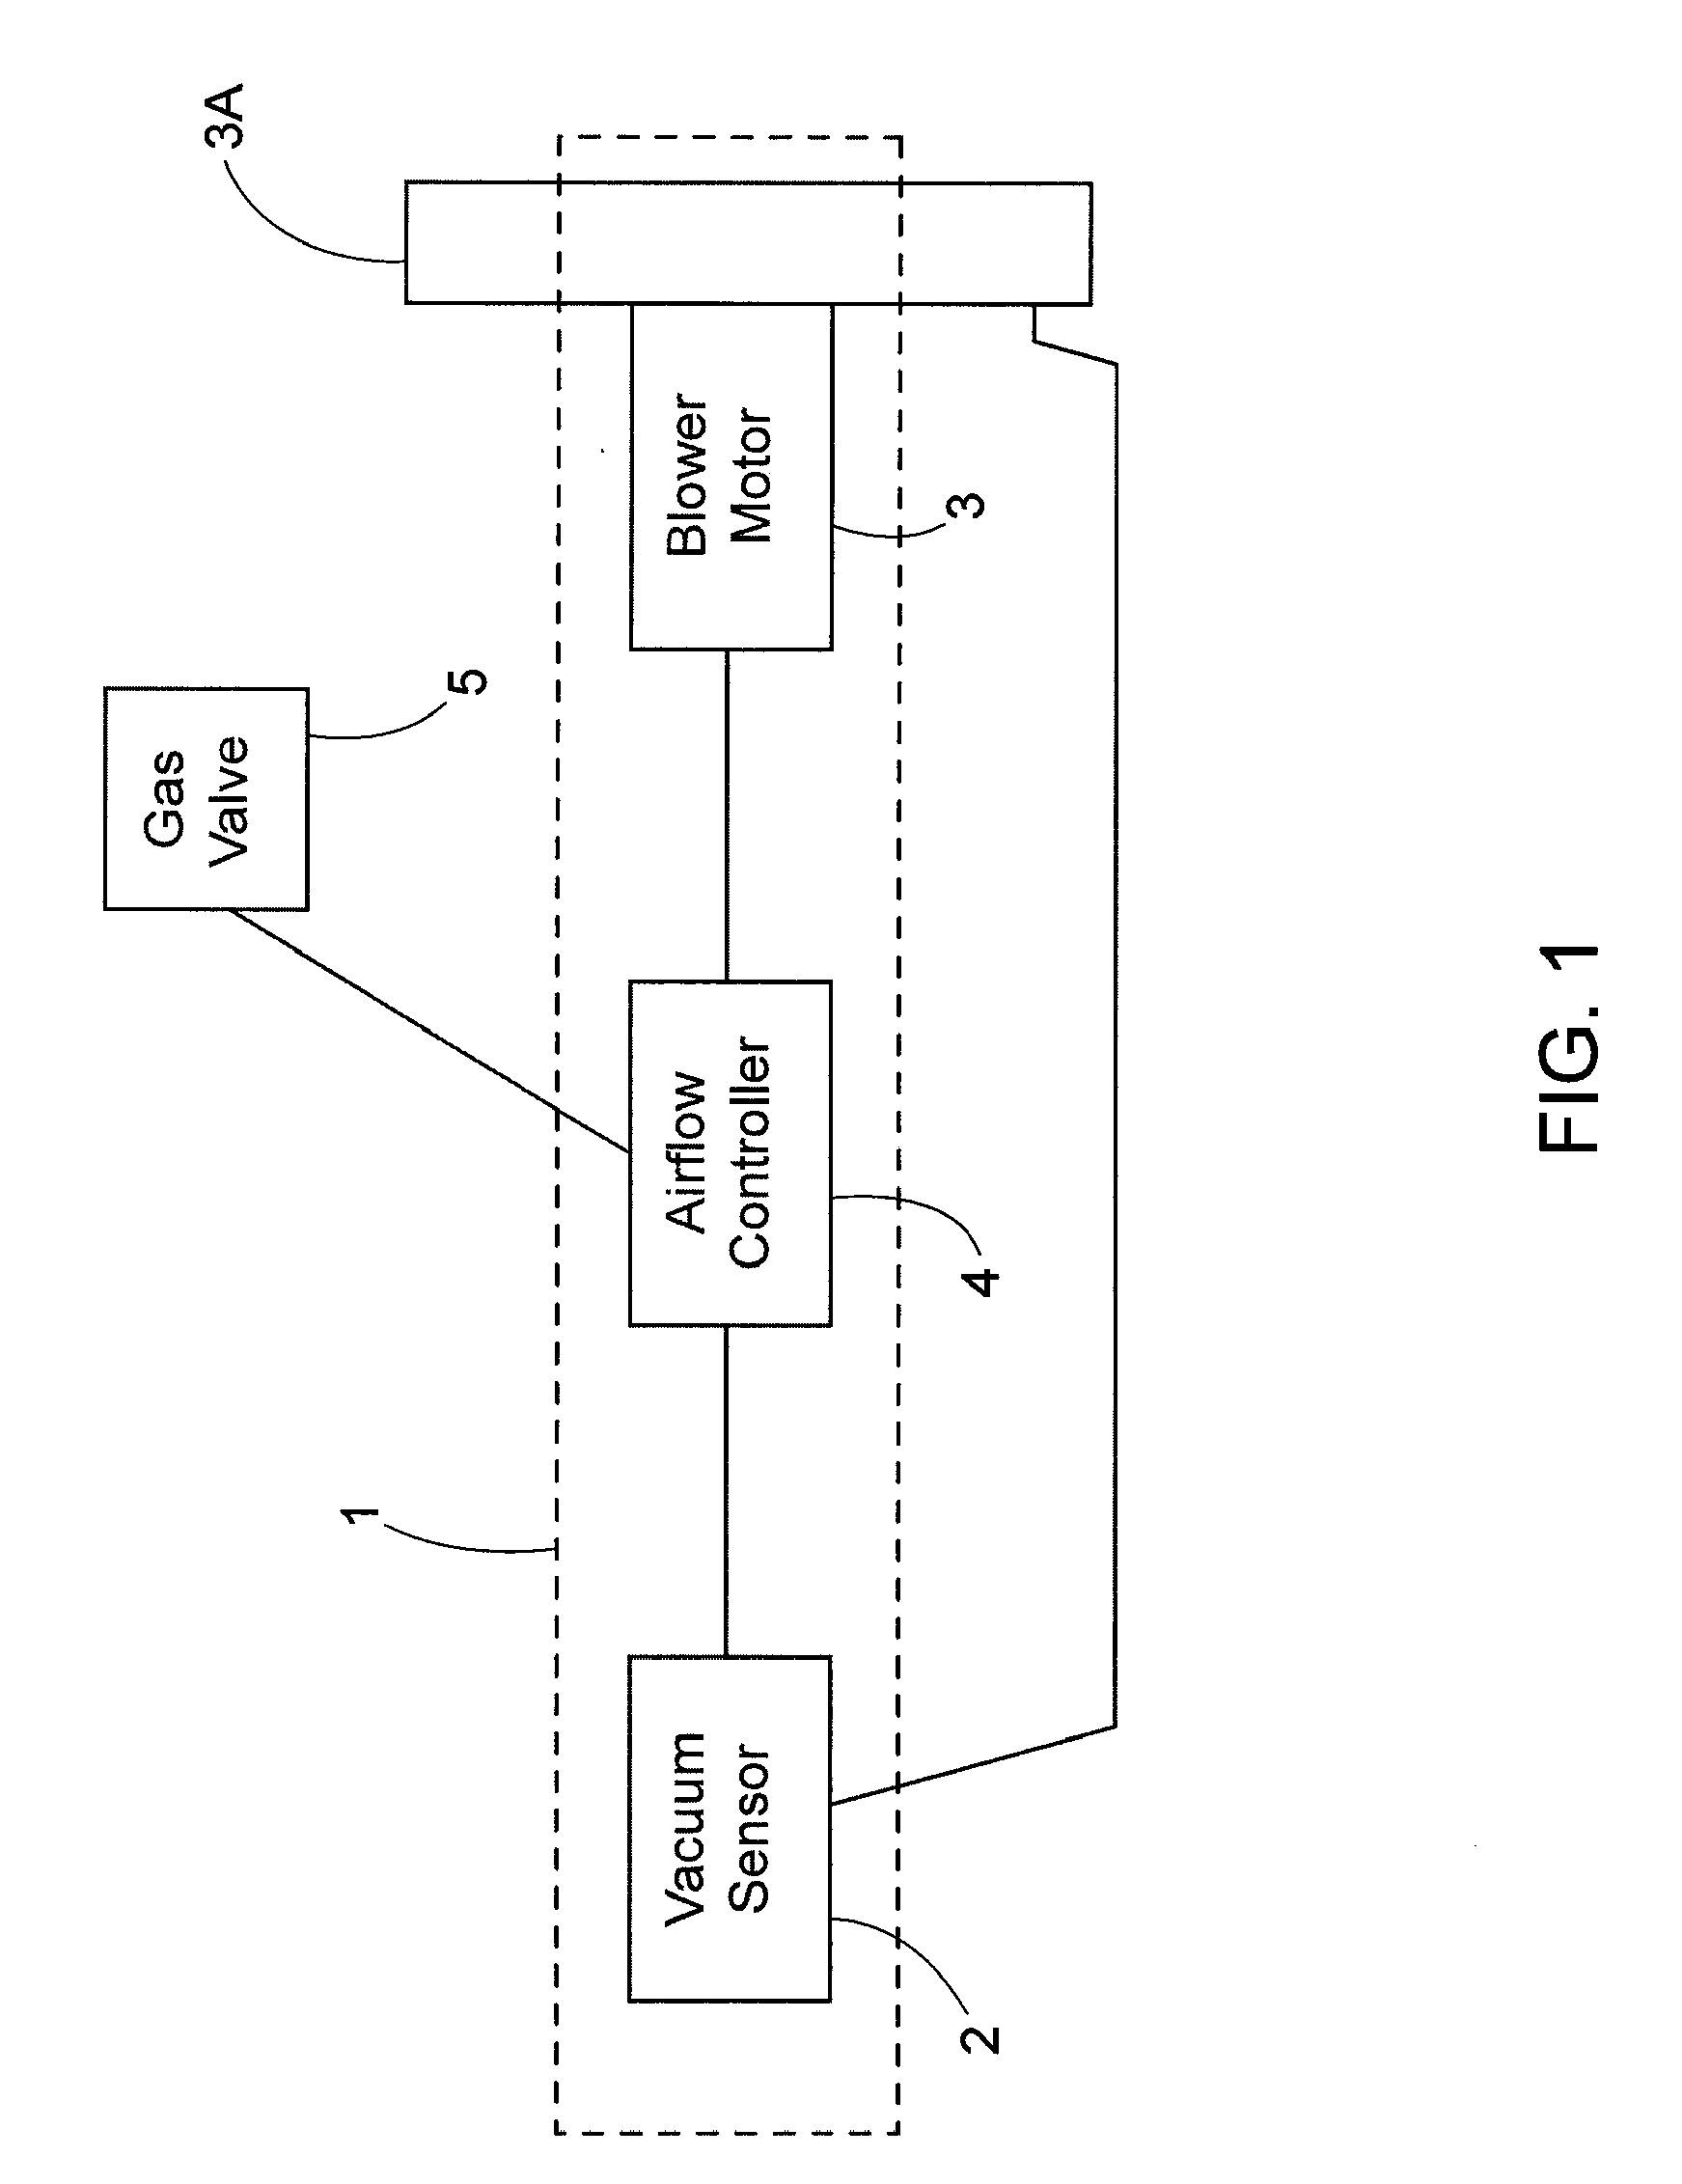 Method and apparatus for producing a constant air flow from a blower by sensing blower housing vacuum